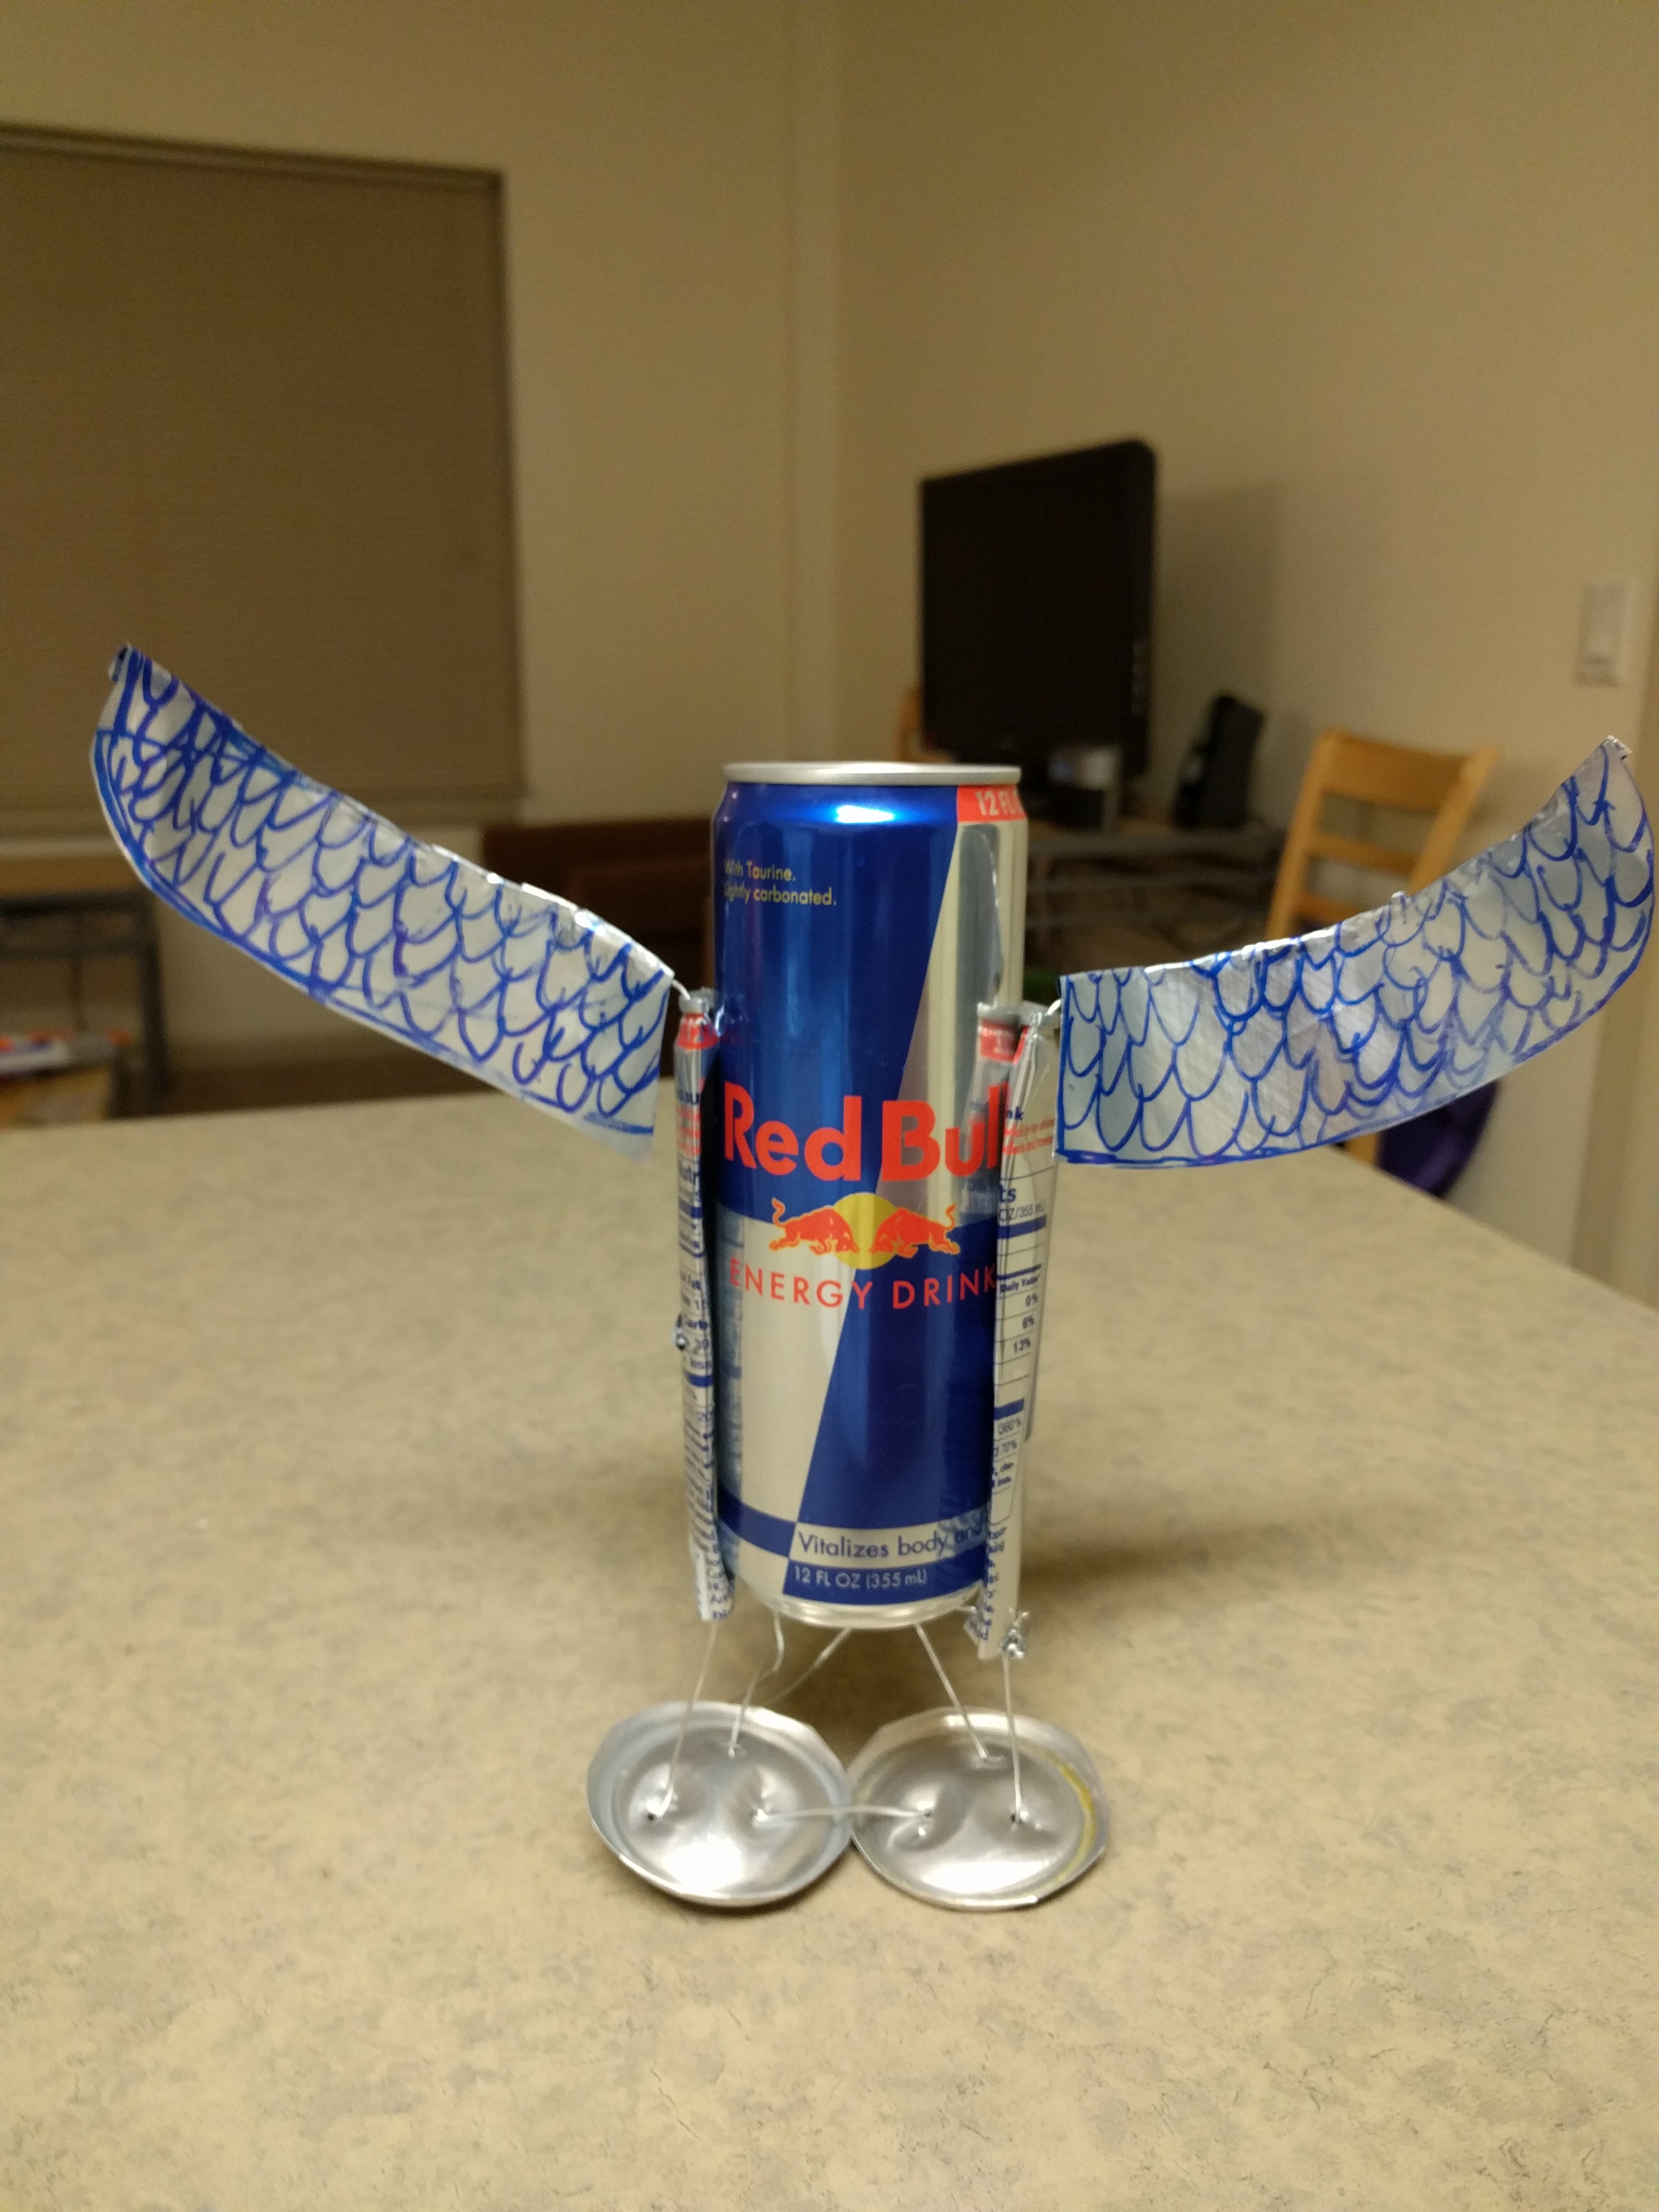 Red Bull Gives You Wings Aesthetics Of Design